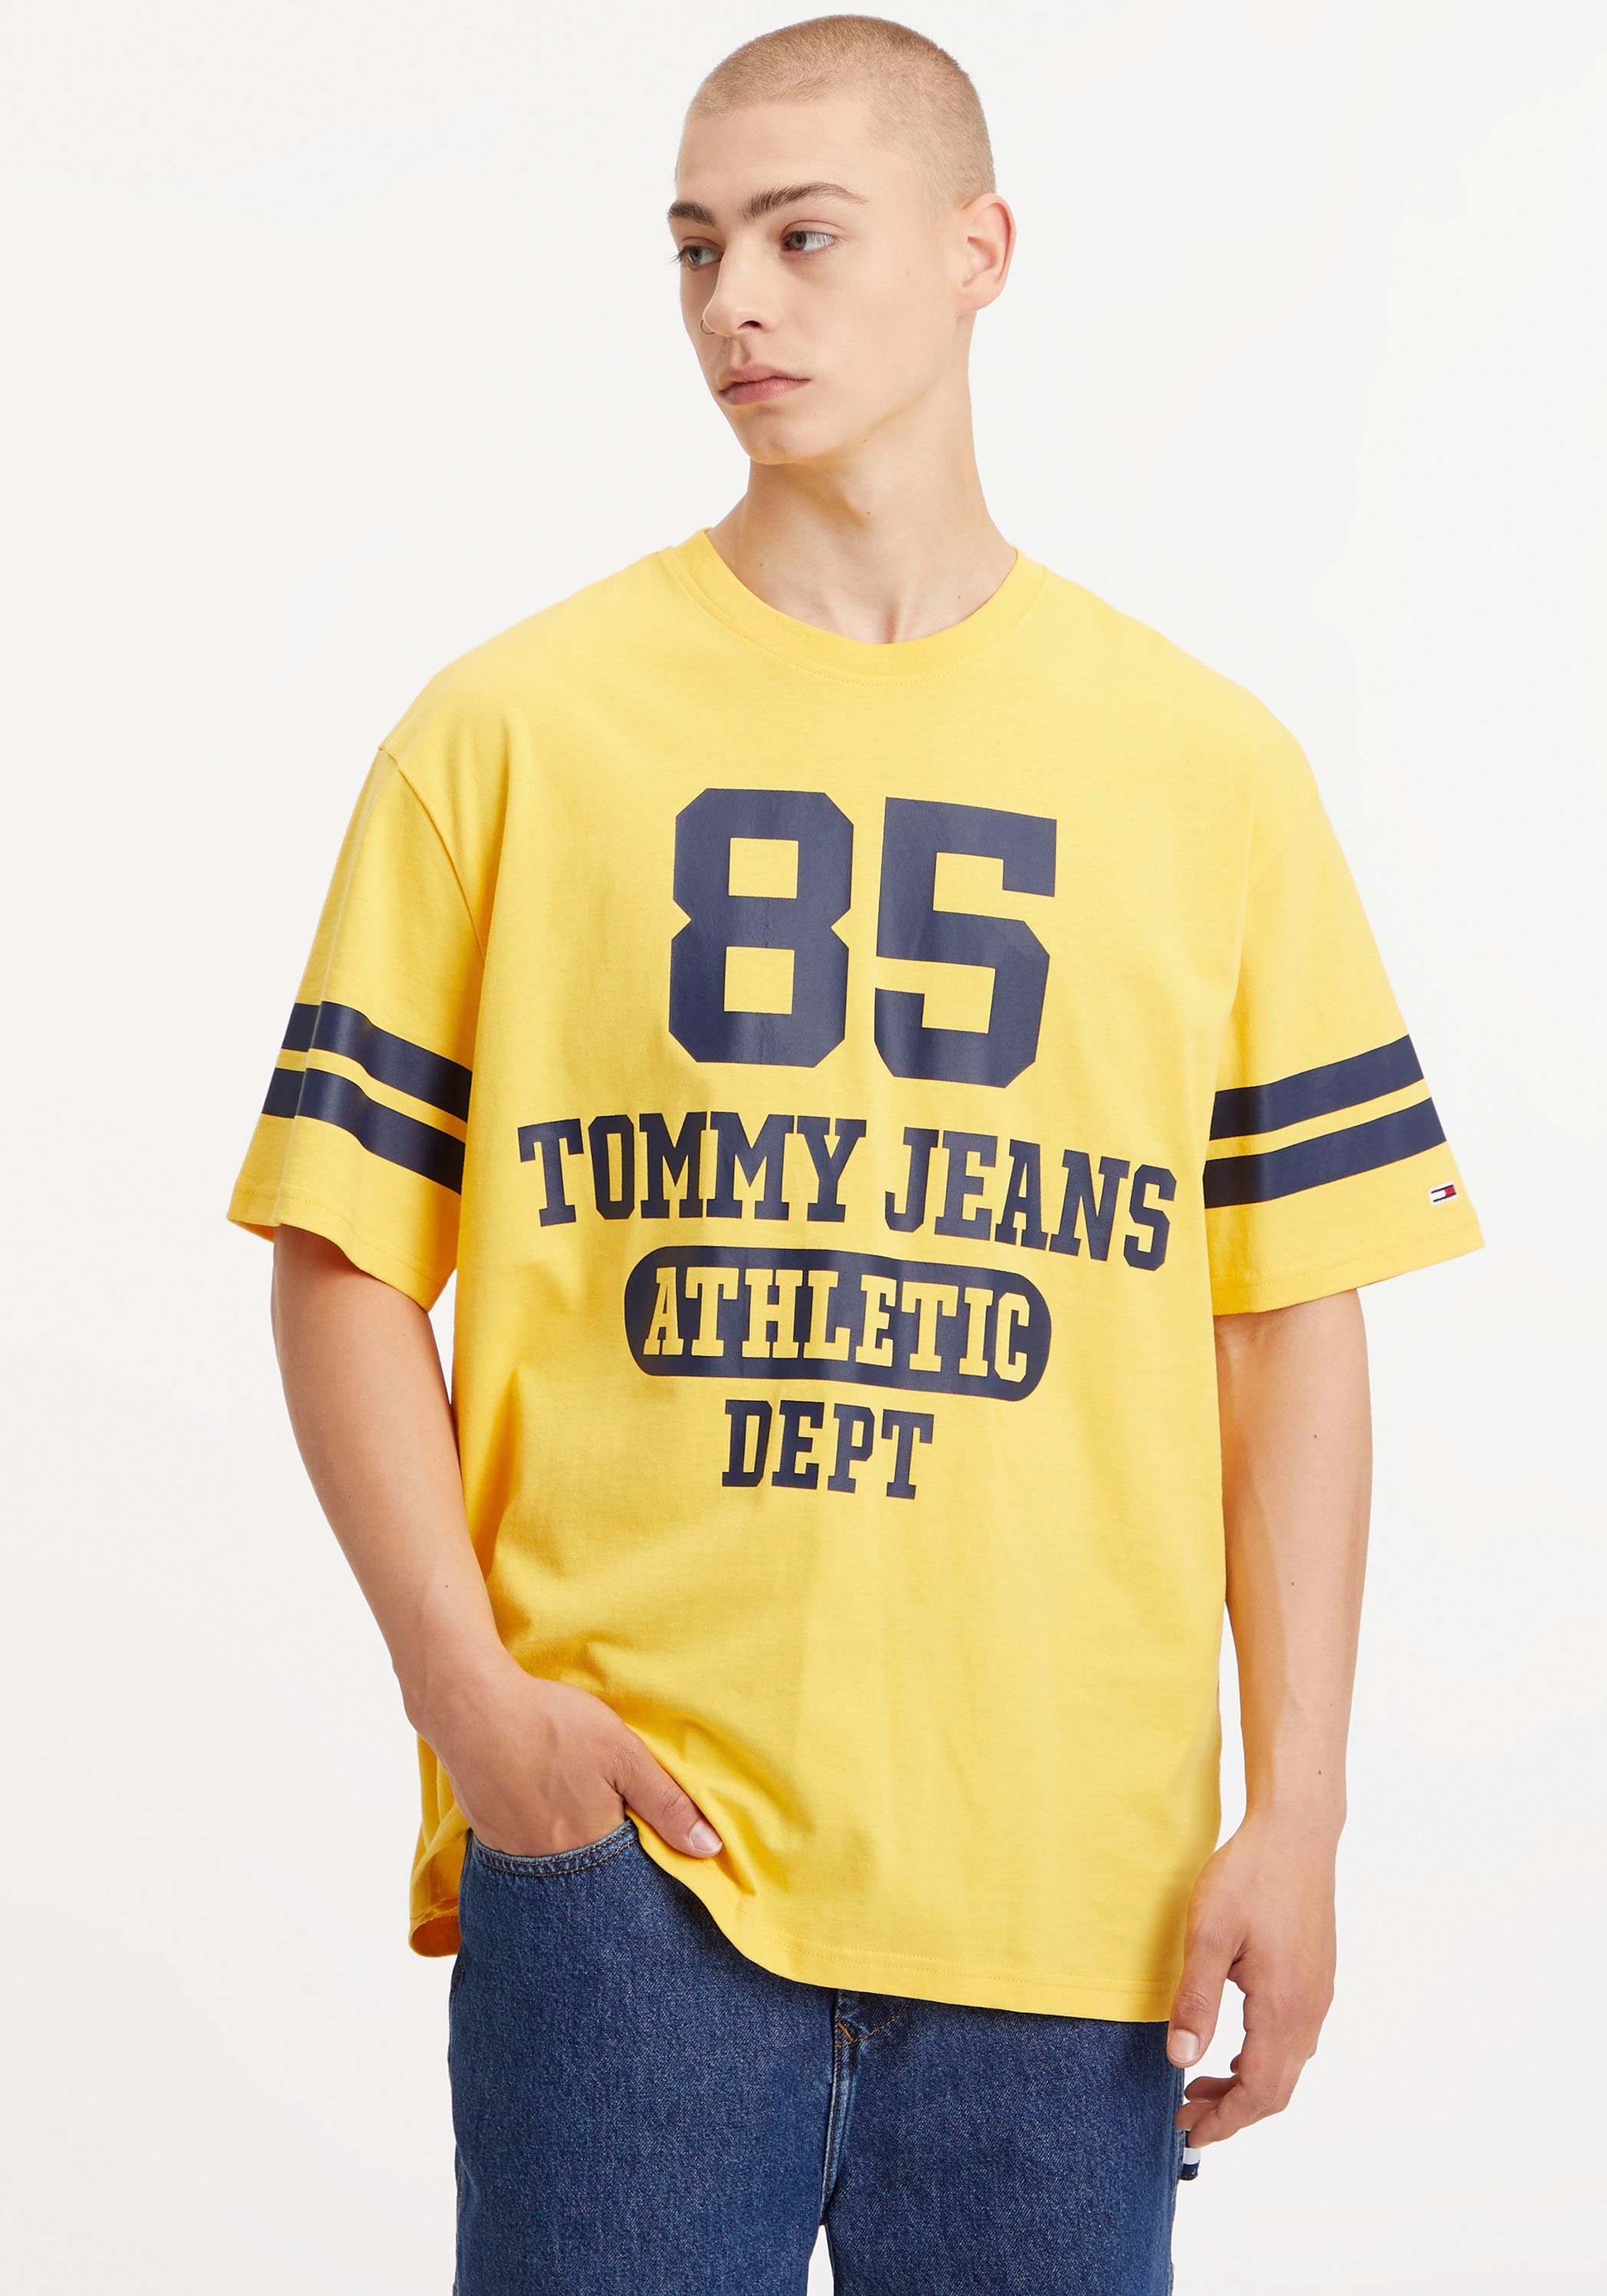 SKATER Warm 85 TJM Tommy Jeans T-Shirt COLLEGE LOGO Yellow